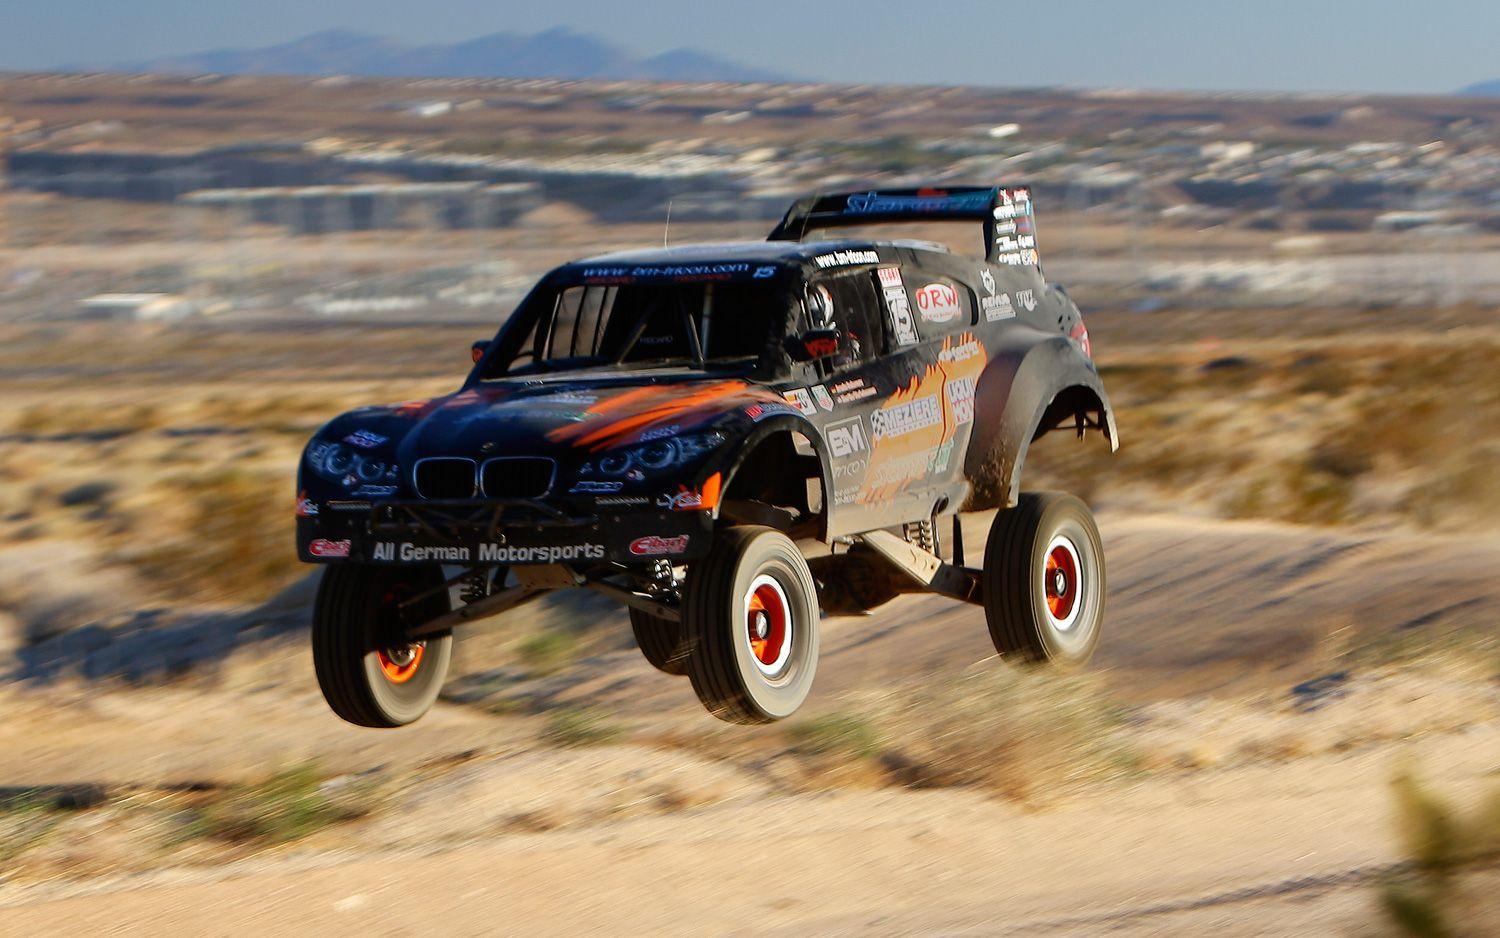 BMW X6 Trophy Truck By All German Motorsports Picture, Photo